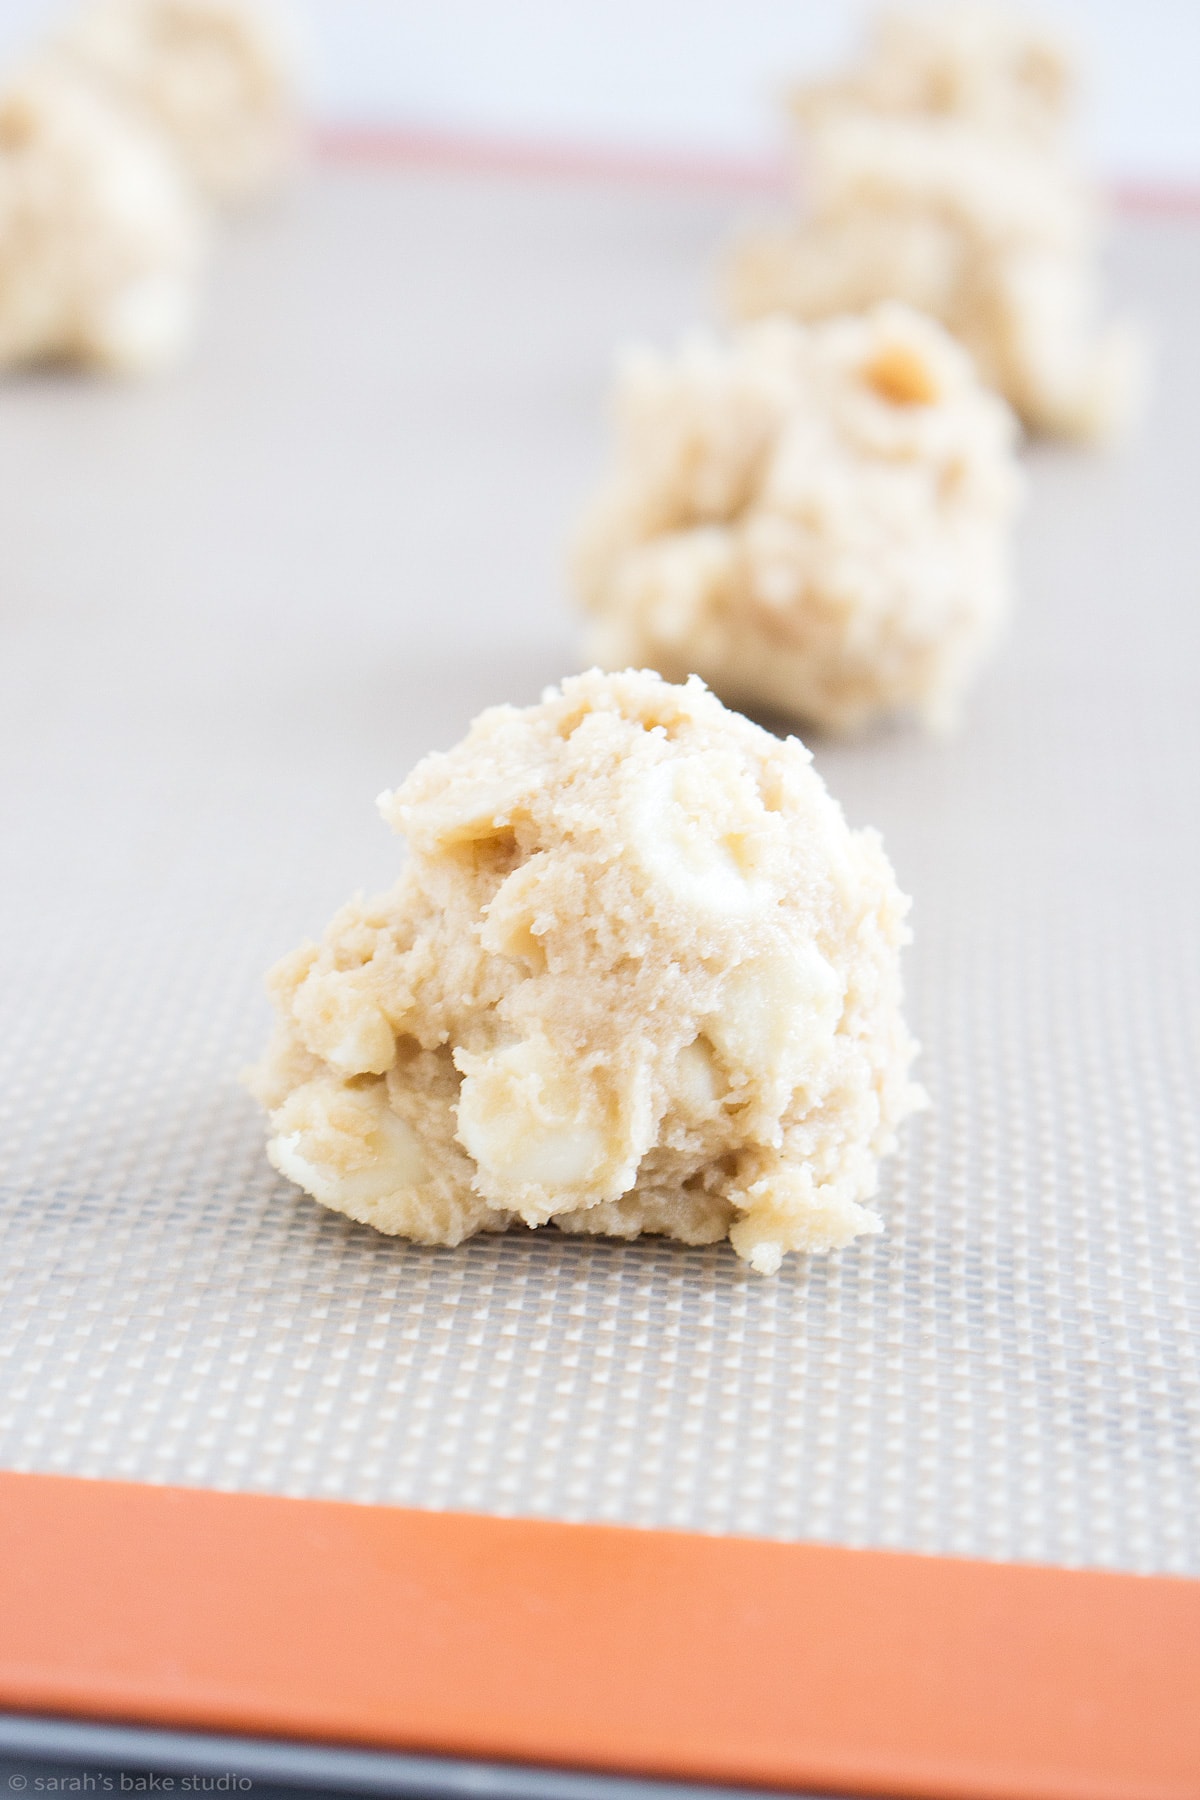 A scoop of White Chocolate Macadamia Nut cookie dough on a baking sheet.